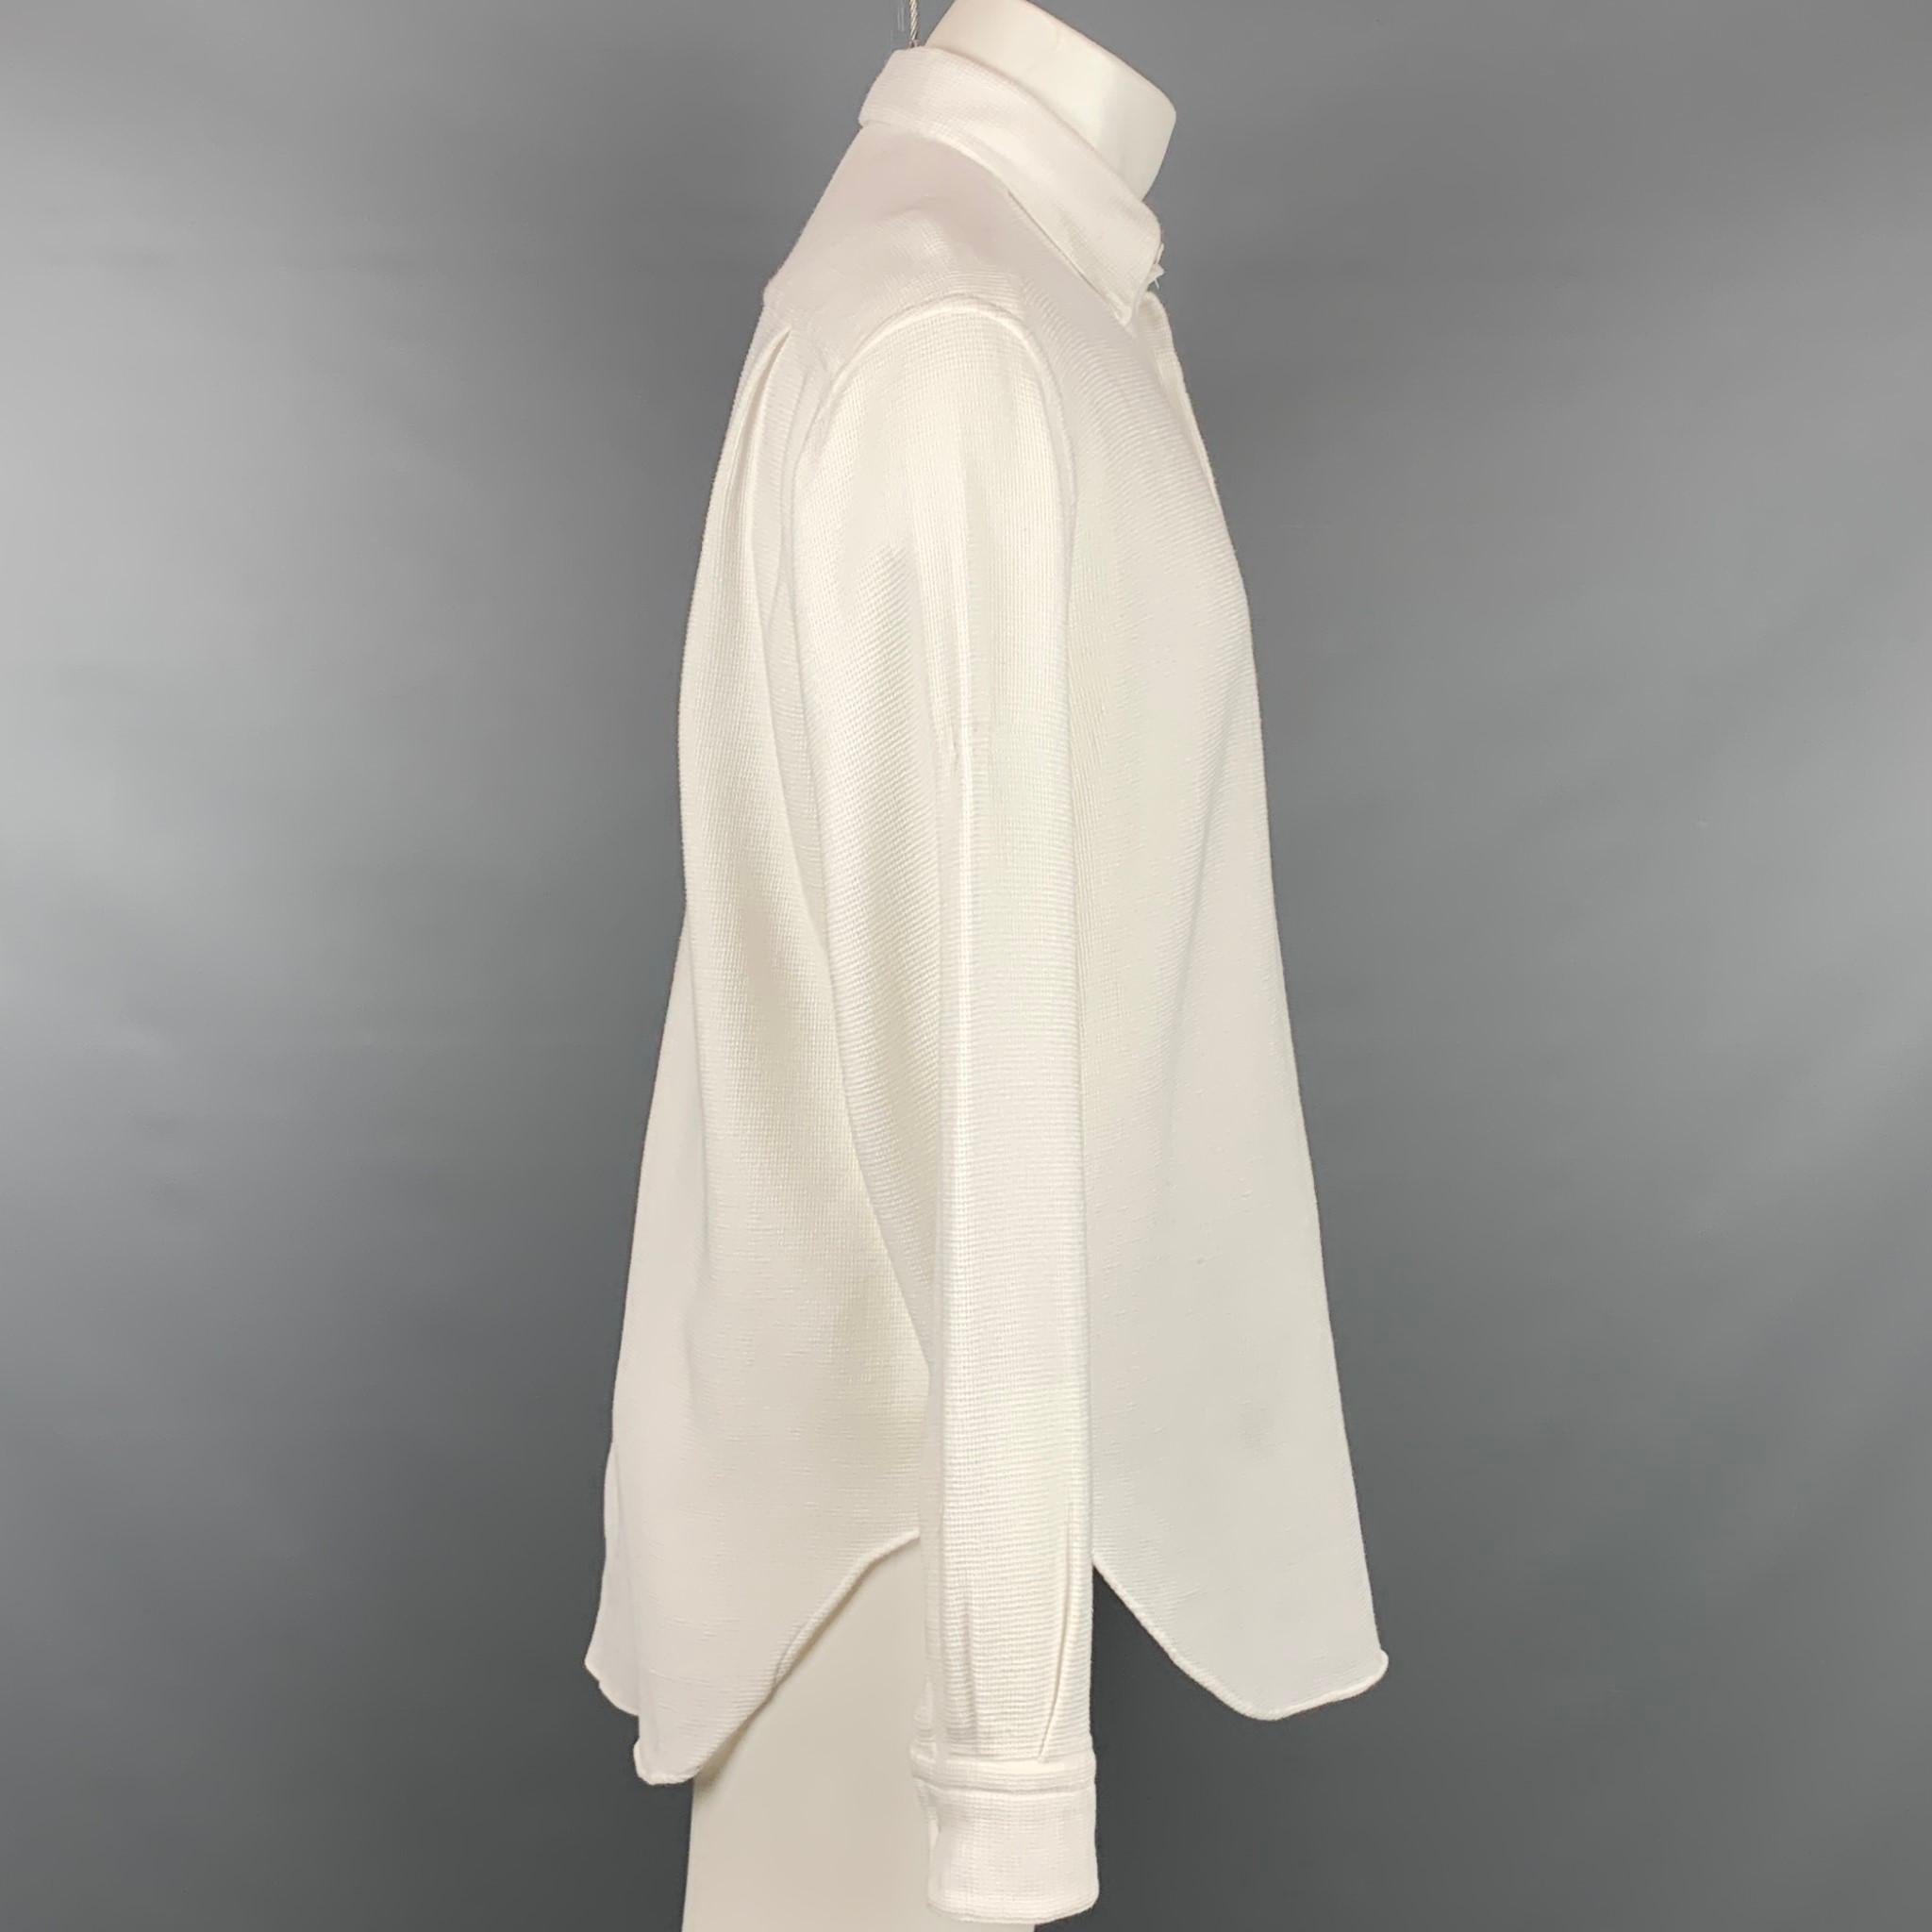 GIORGIO ARMANI long sleeve shirt comes in a white waffle knit cotton featuring a button down style and a front pocket. Made in Italy.

Very Good Pre-Owned Condition.
Marked: 15.5/39

Measurements:

Shoulder: 19 in.
Chest: 44 in.
Sleeve: 27